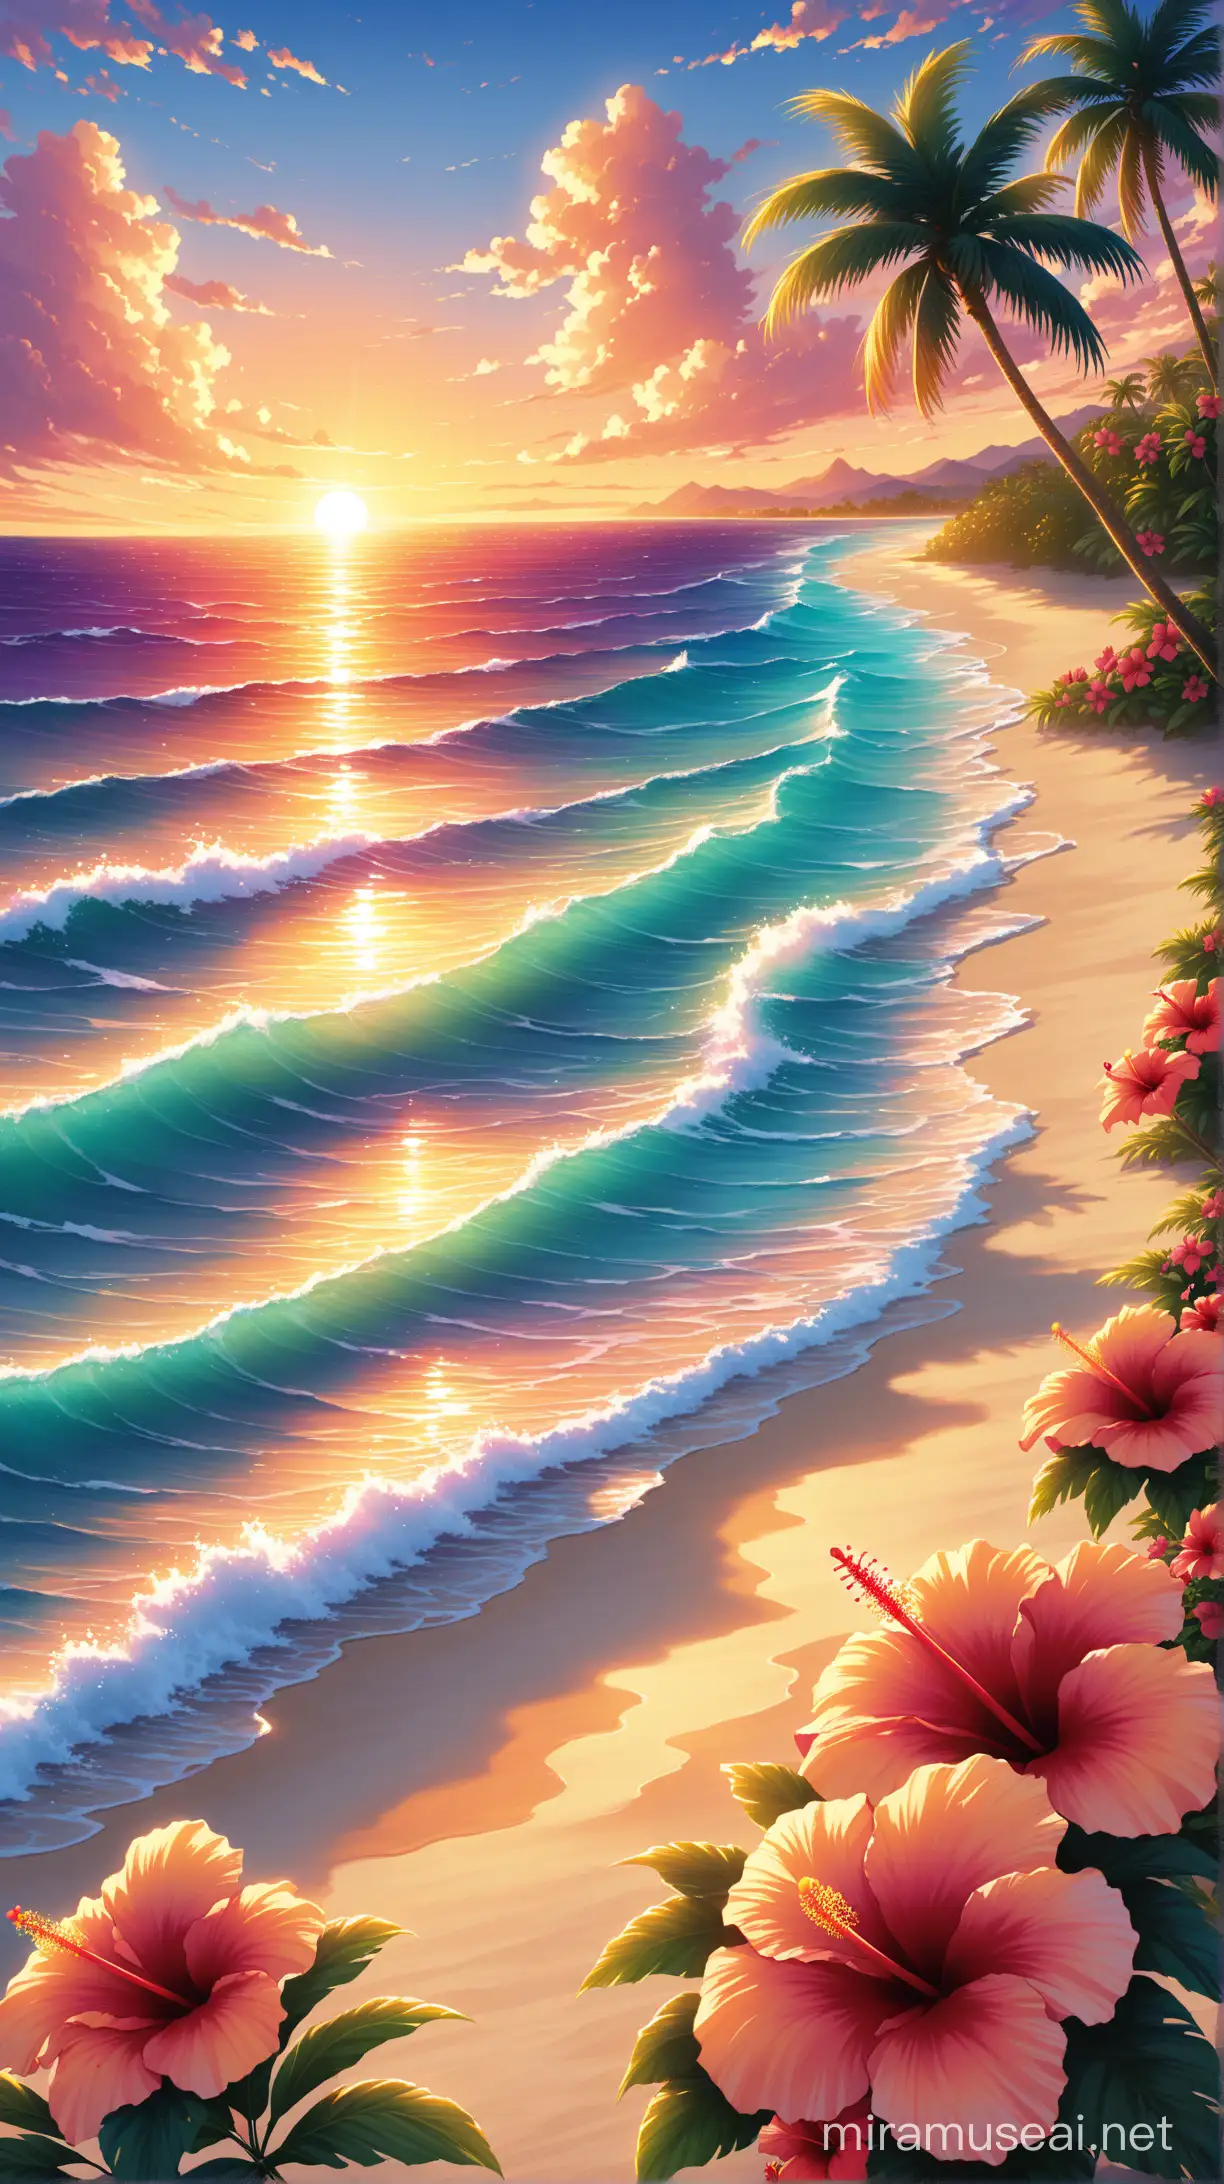 Tropical oasis sunset view, ocean waves and hibiscus blooms